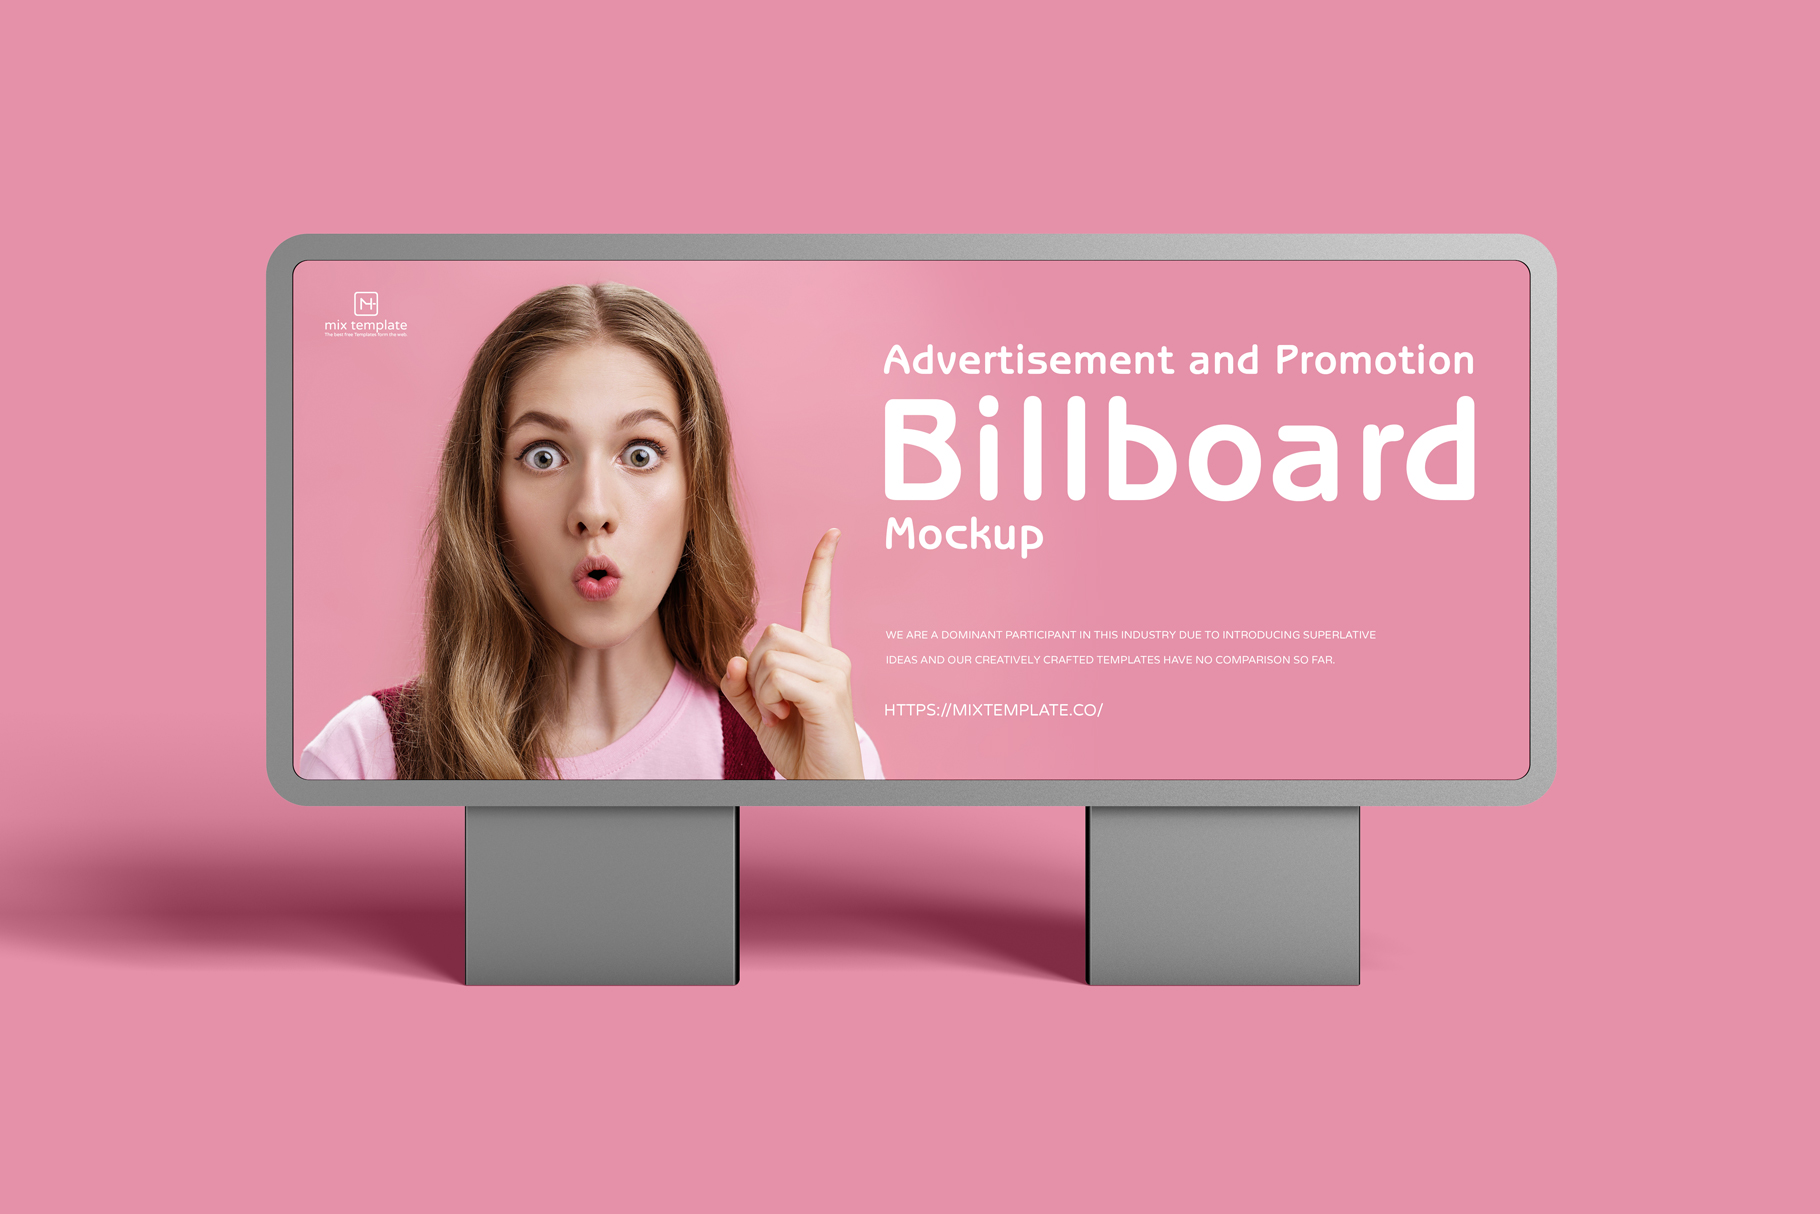 Brand-Advertisement-And-Promotion-Billboard-Mockup-Template